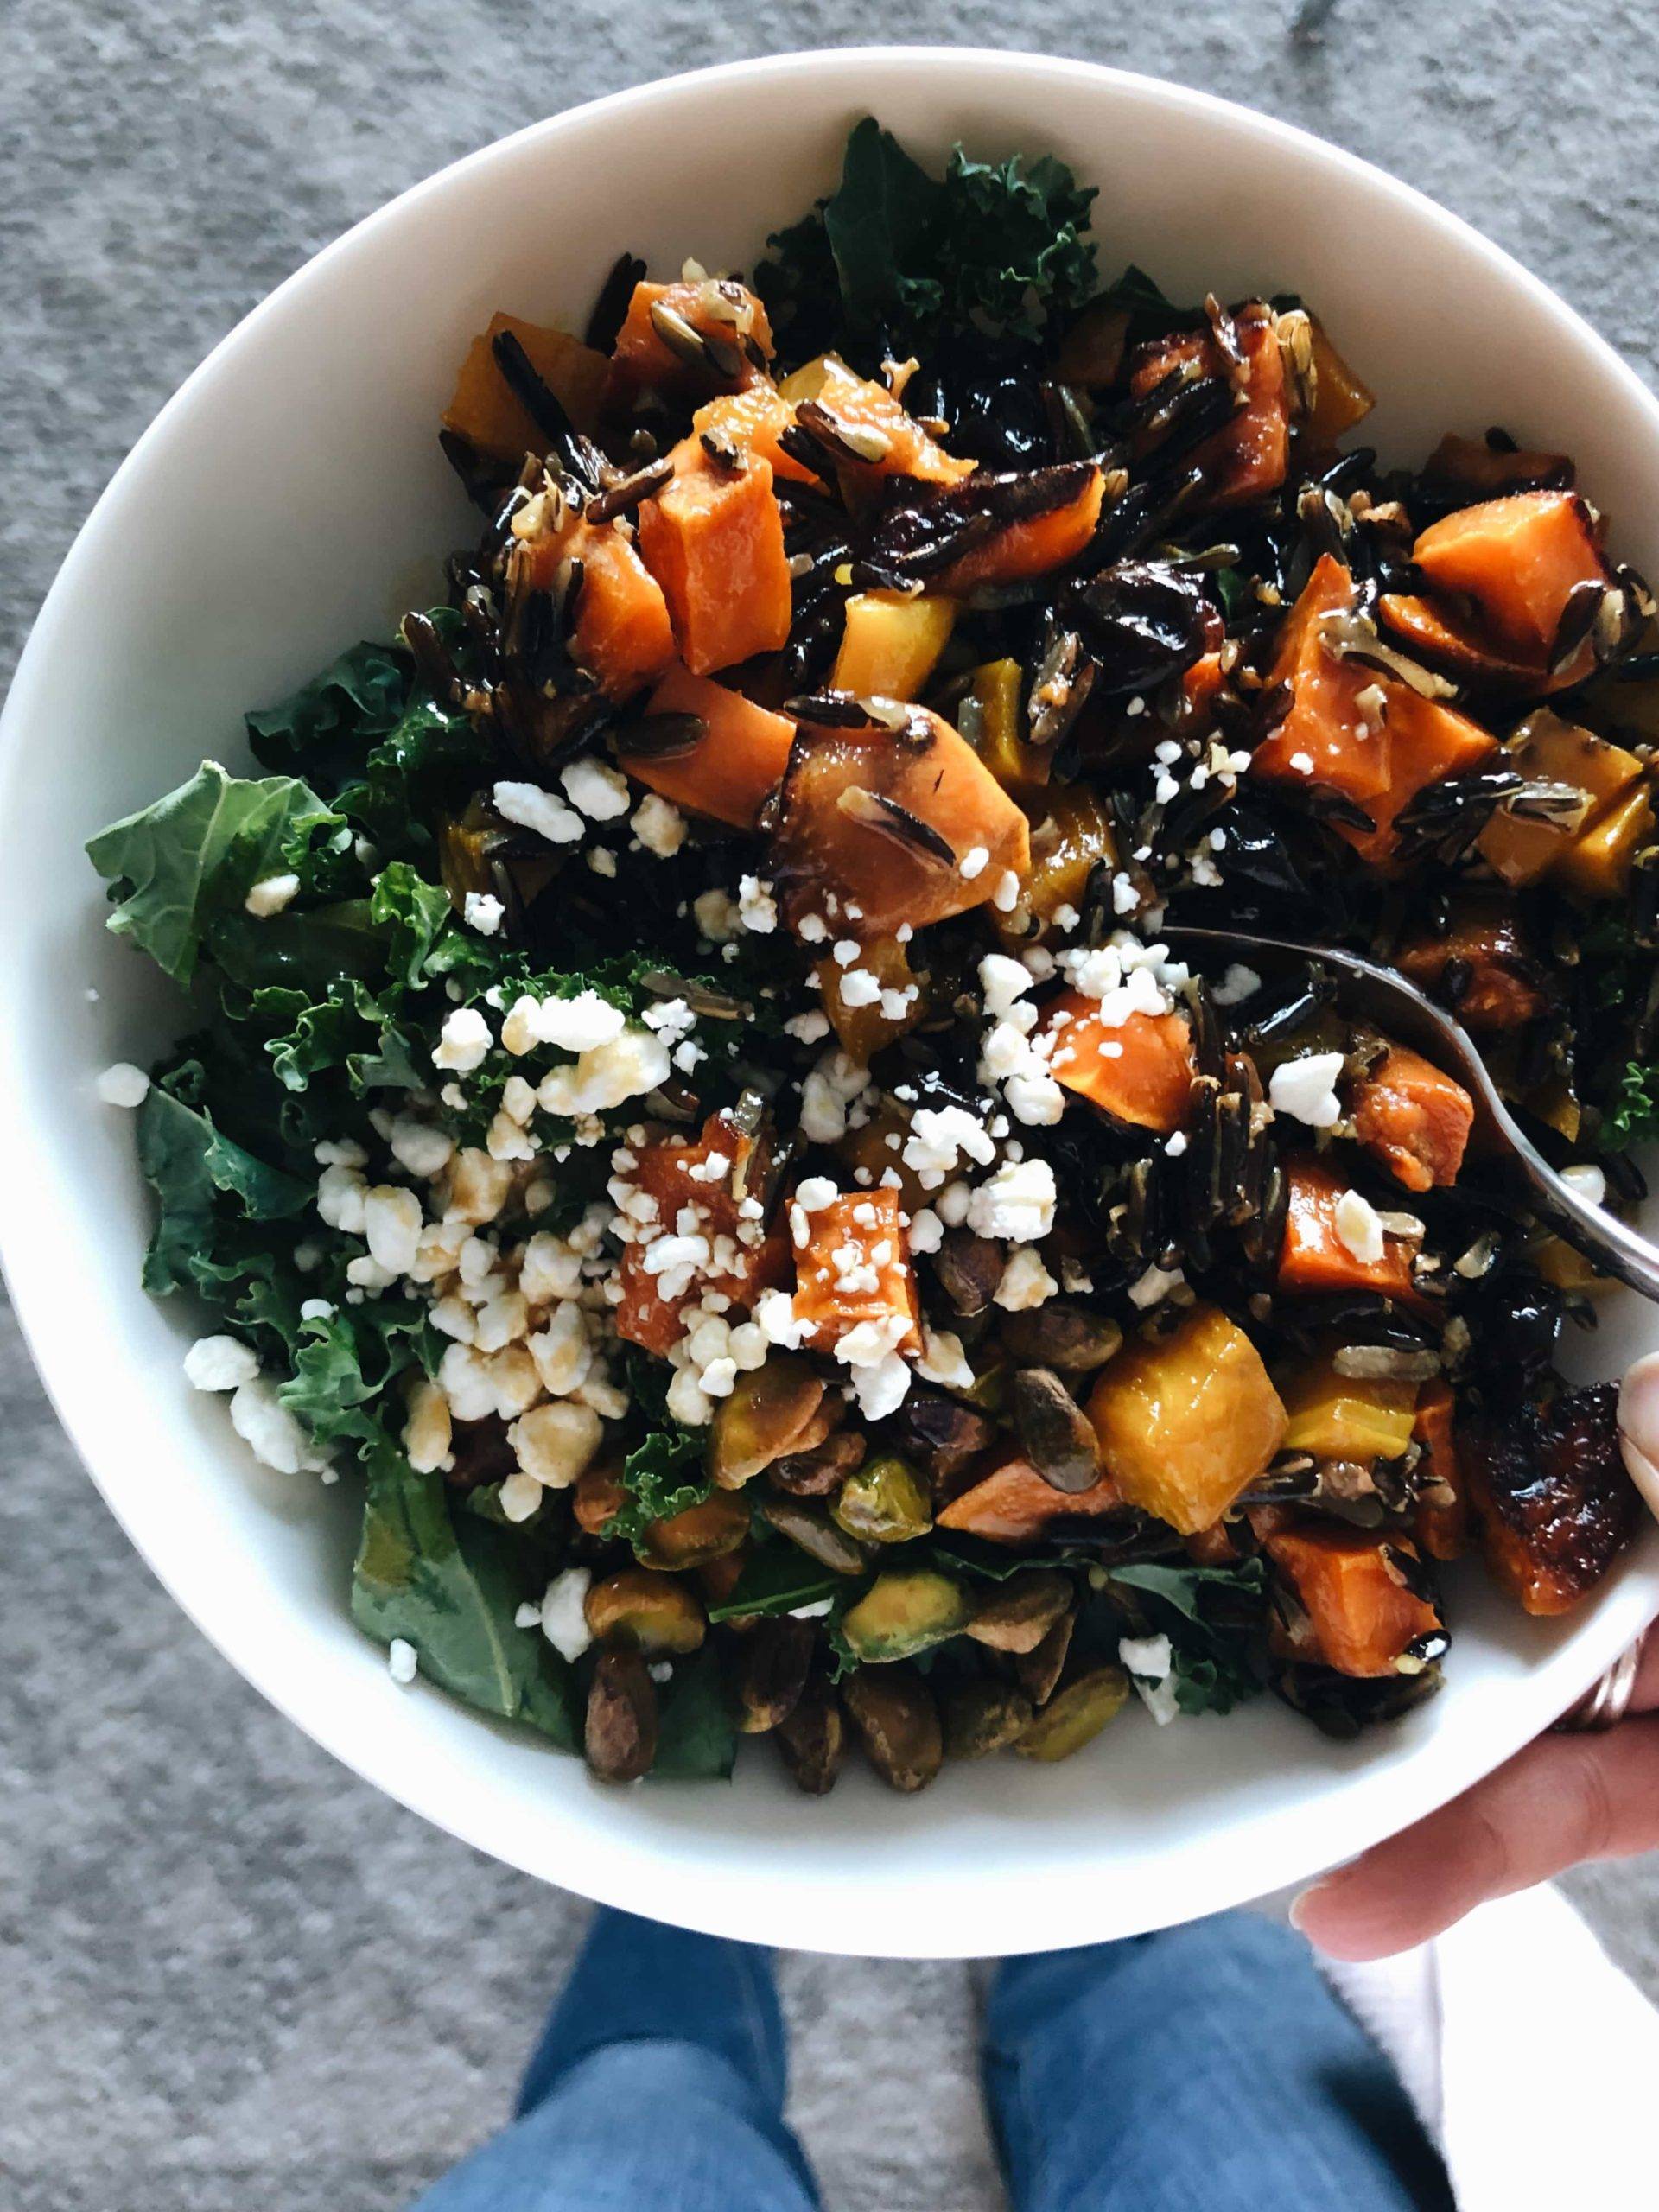 A large white bowl of squash, wild rice, pumpkin seeds, and feta cheese crumbles over wilted greens.